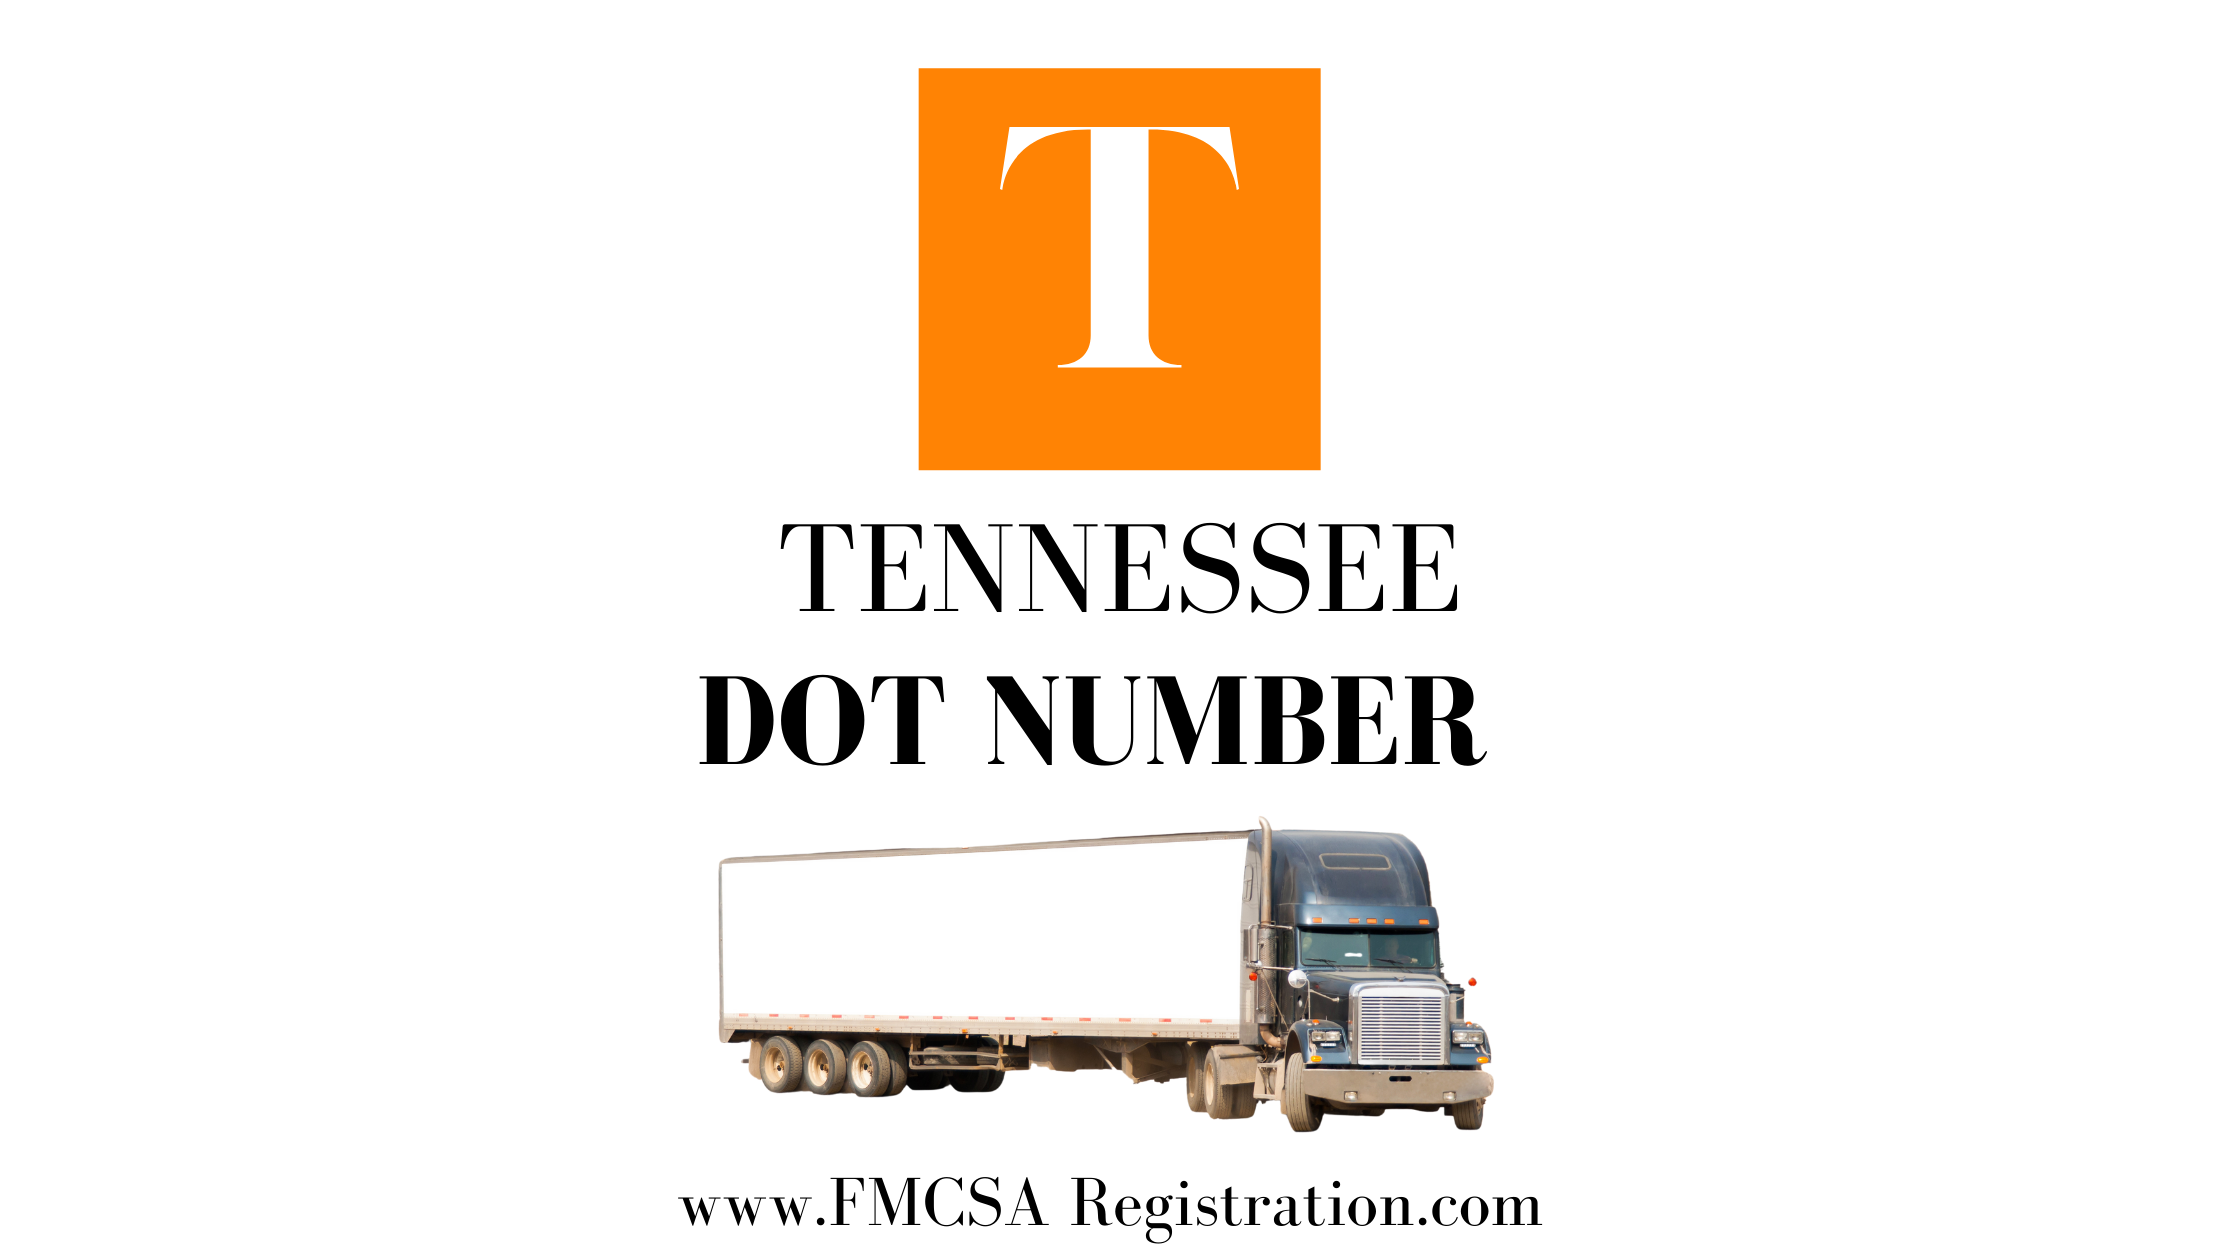 Tennessee DOT Number